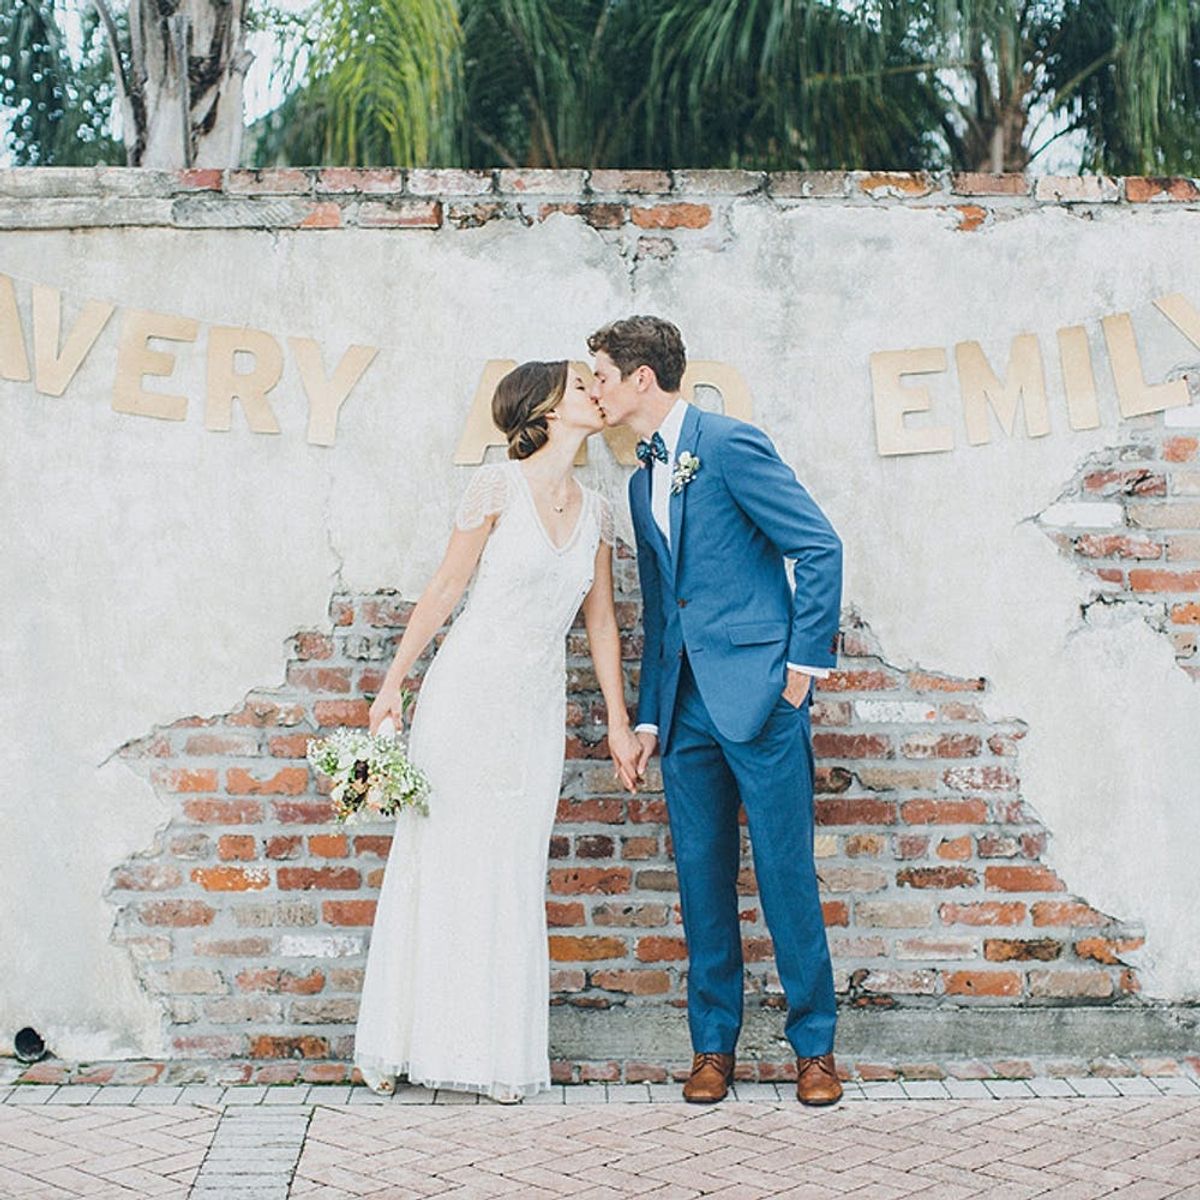 This Intimate + Artsy NOLA Wedding Is What DIY Dreams Are Made Of